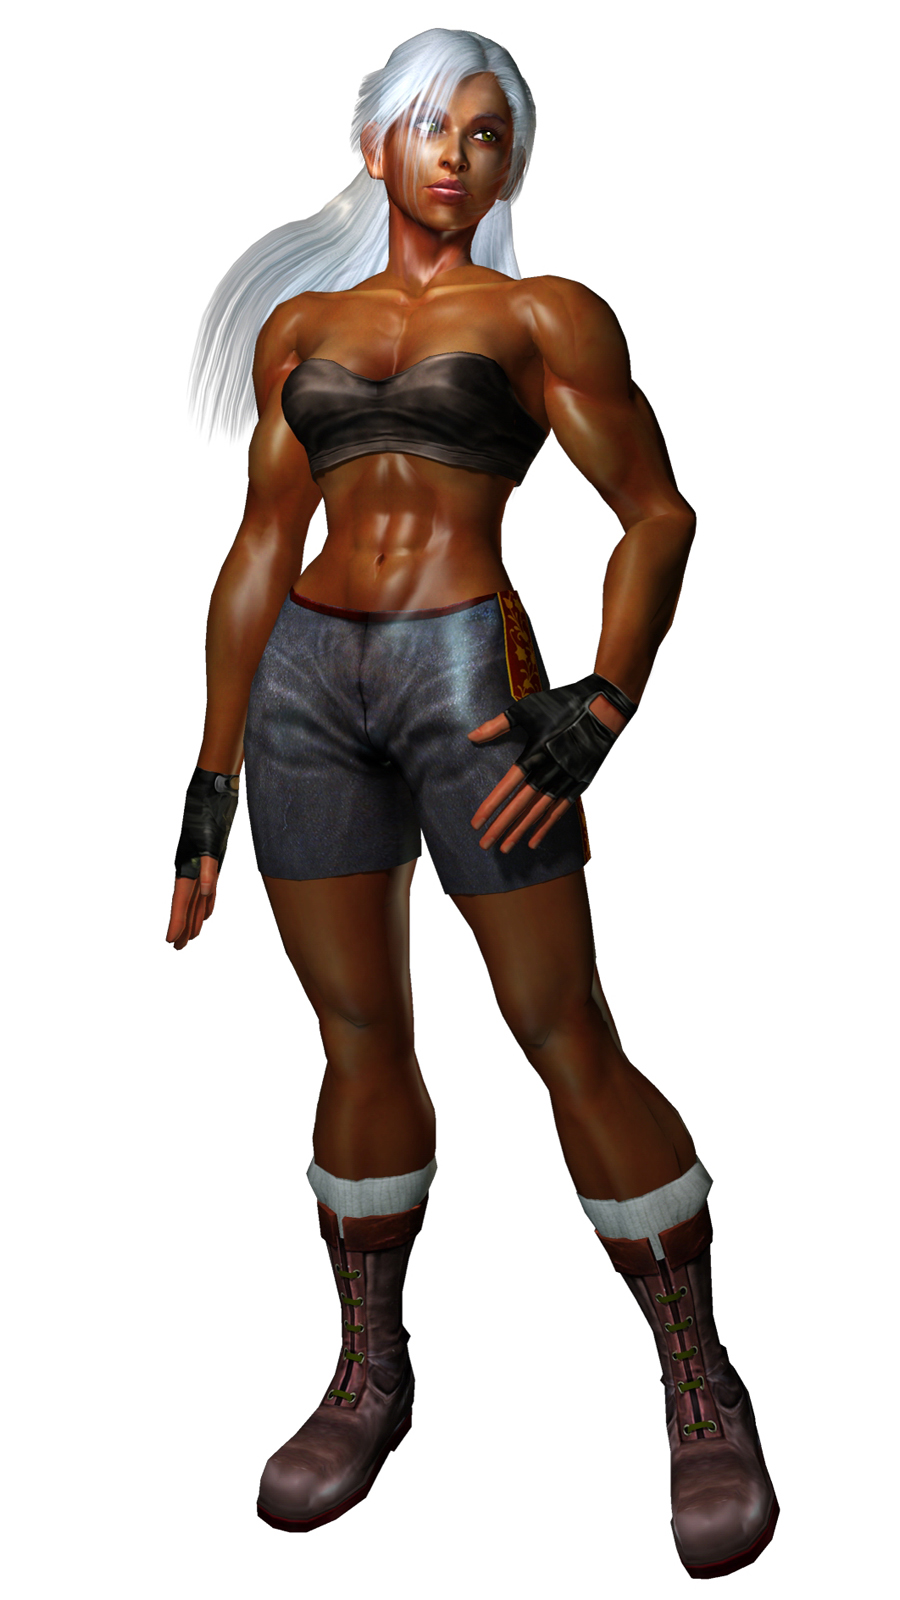 Vanessa Lewis is a fictional character in the video game series Virtua Figh...